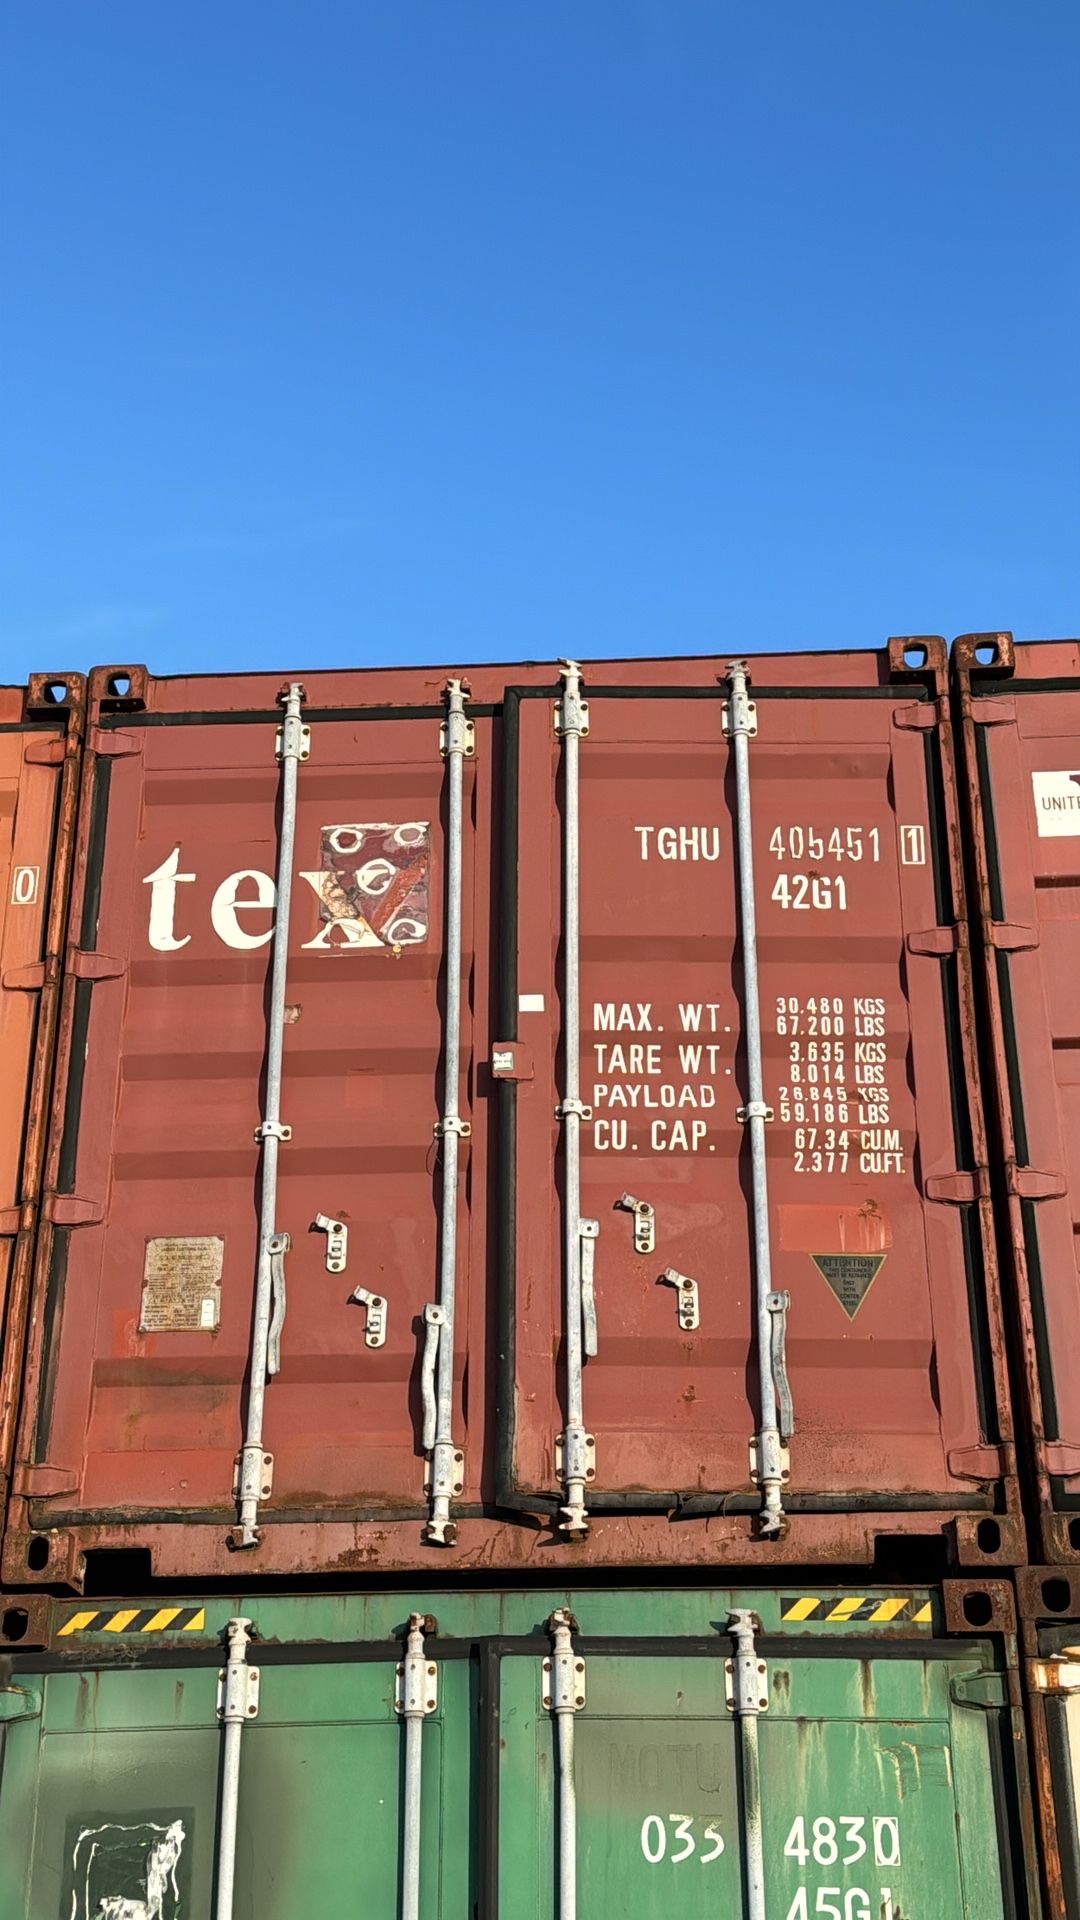 Shipping Container - 29 (TGHU405451142G1)